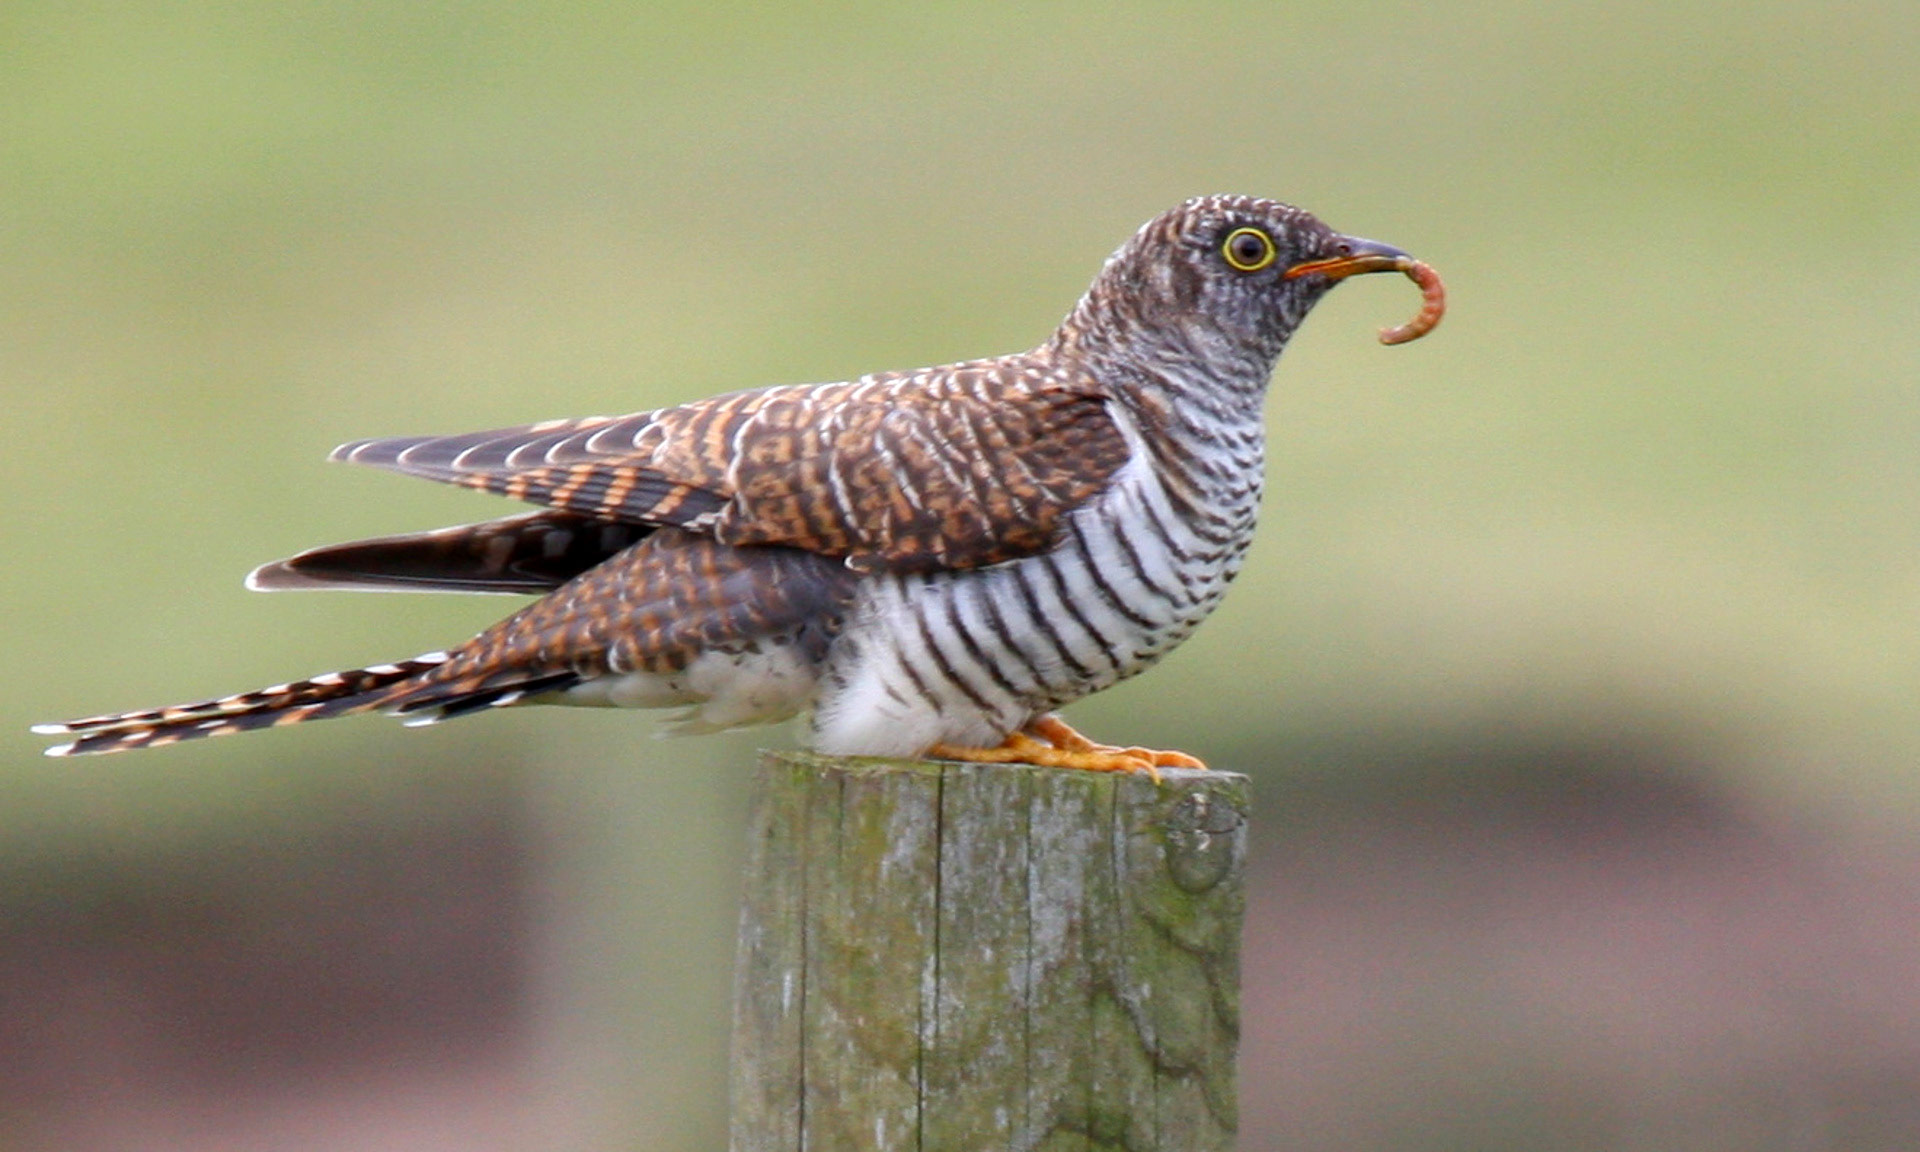 Juvenile Cuckoo stands on fencepost